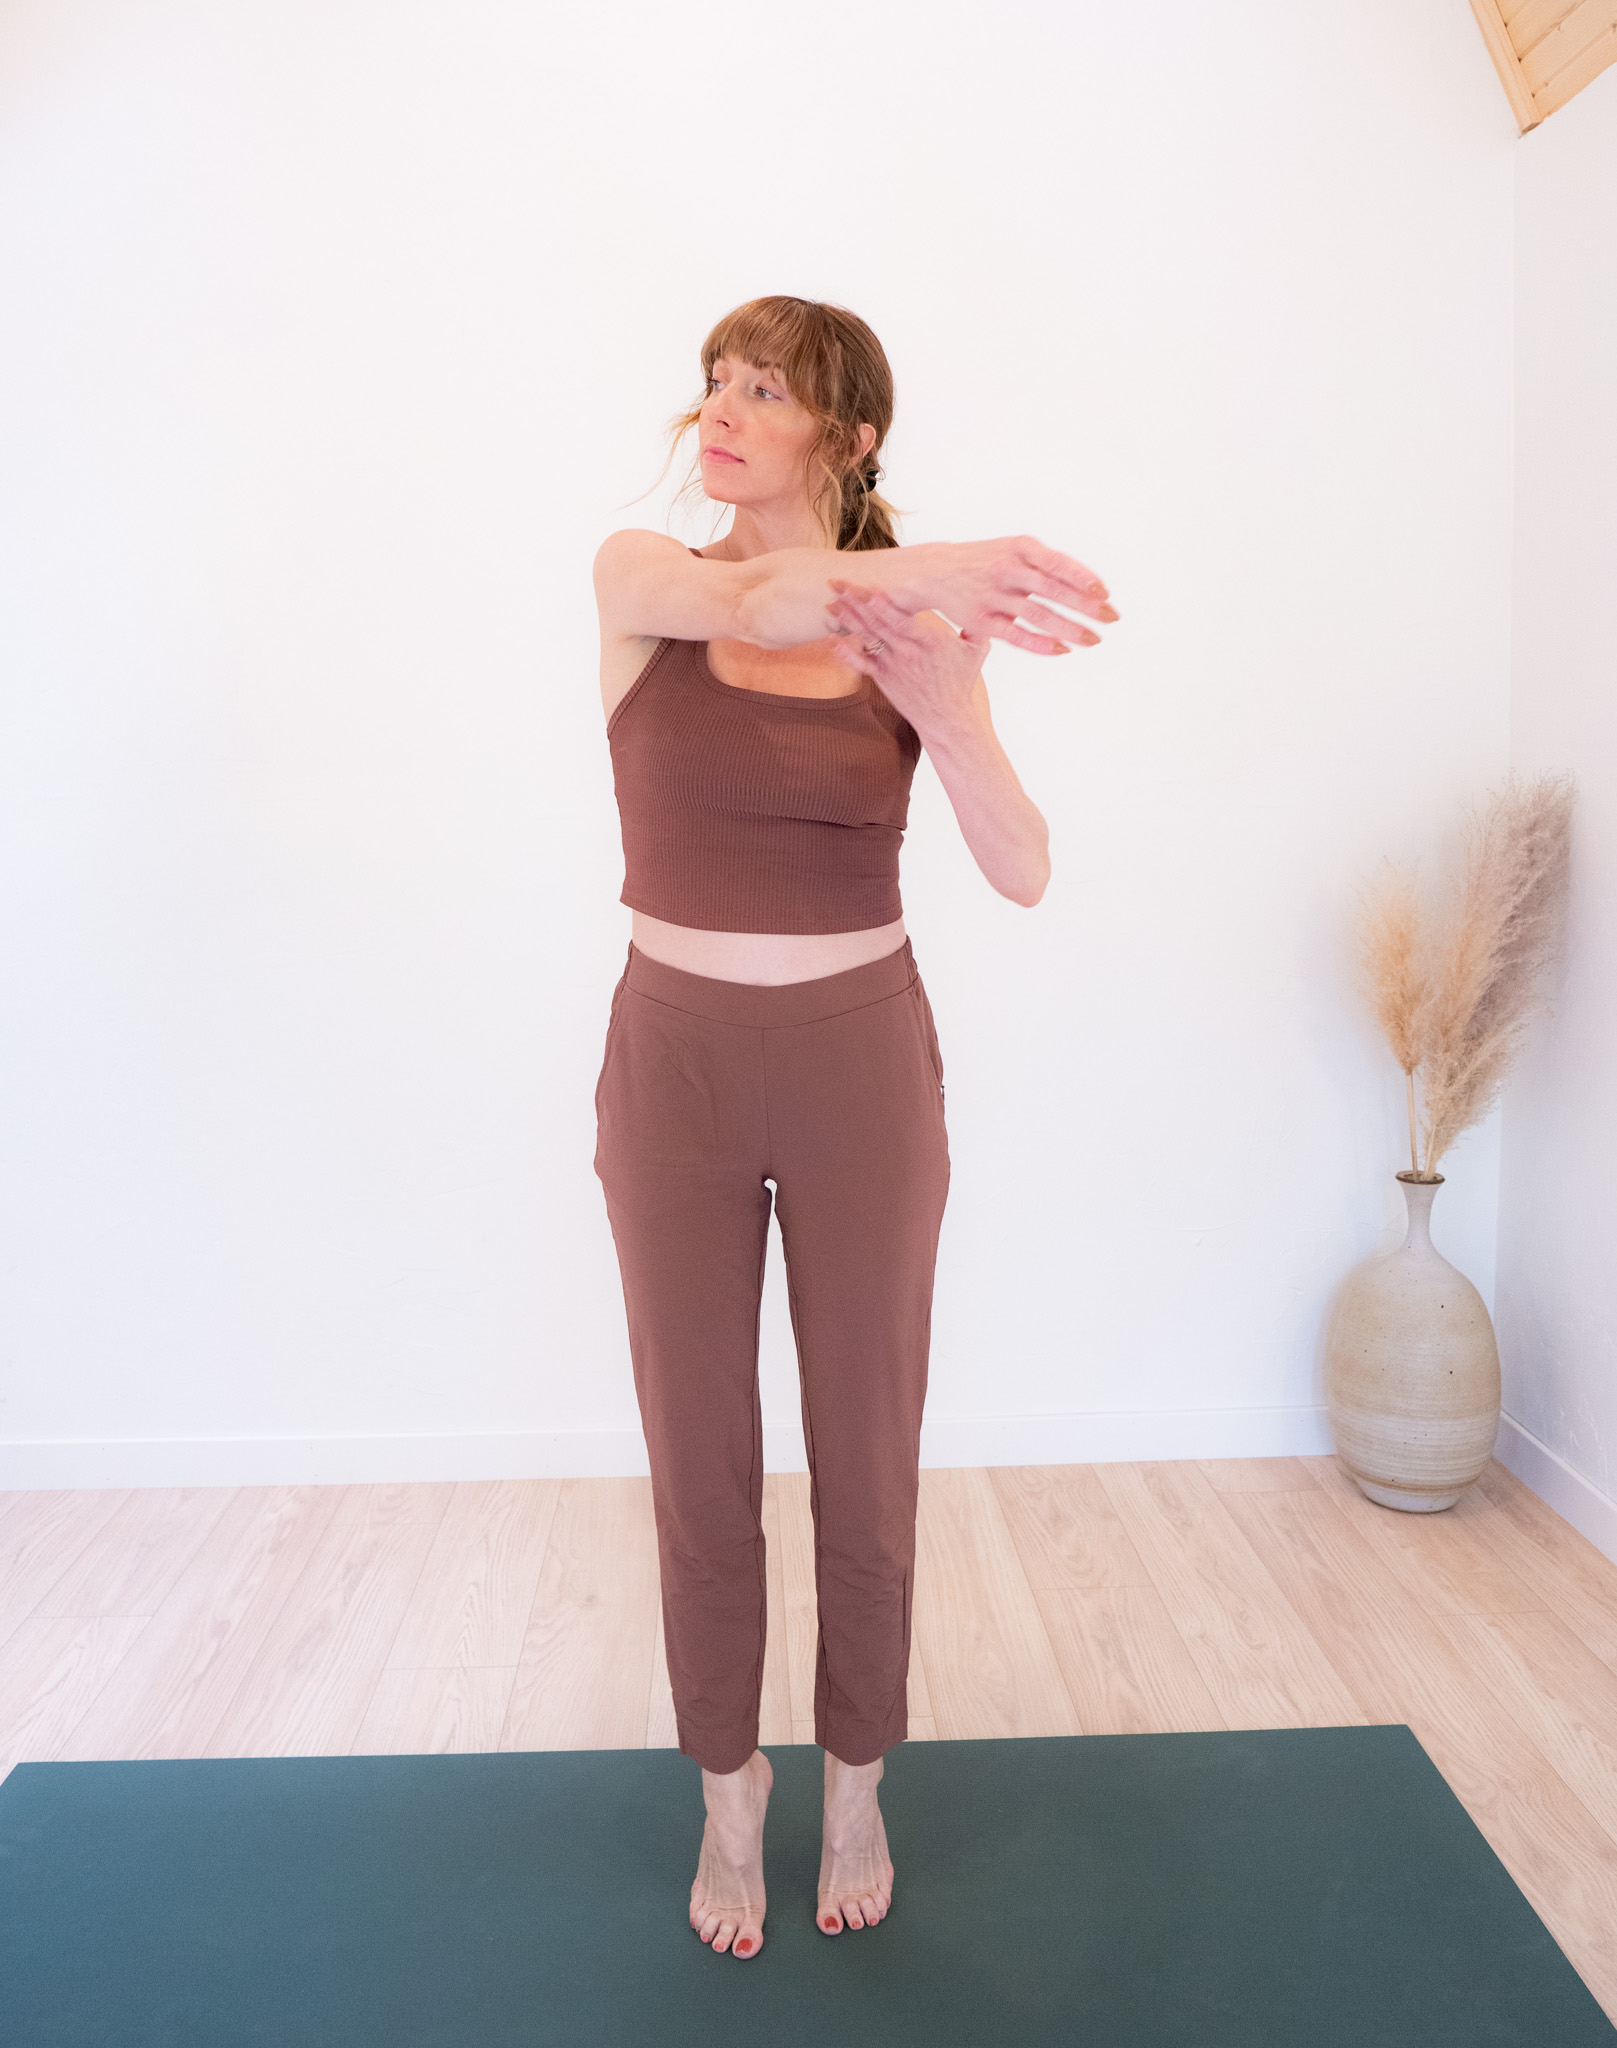 Woman in burgundy athletic wear stretching arms across her chest in a bright yoga studio.